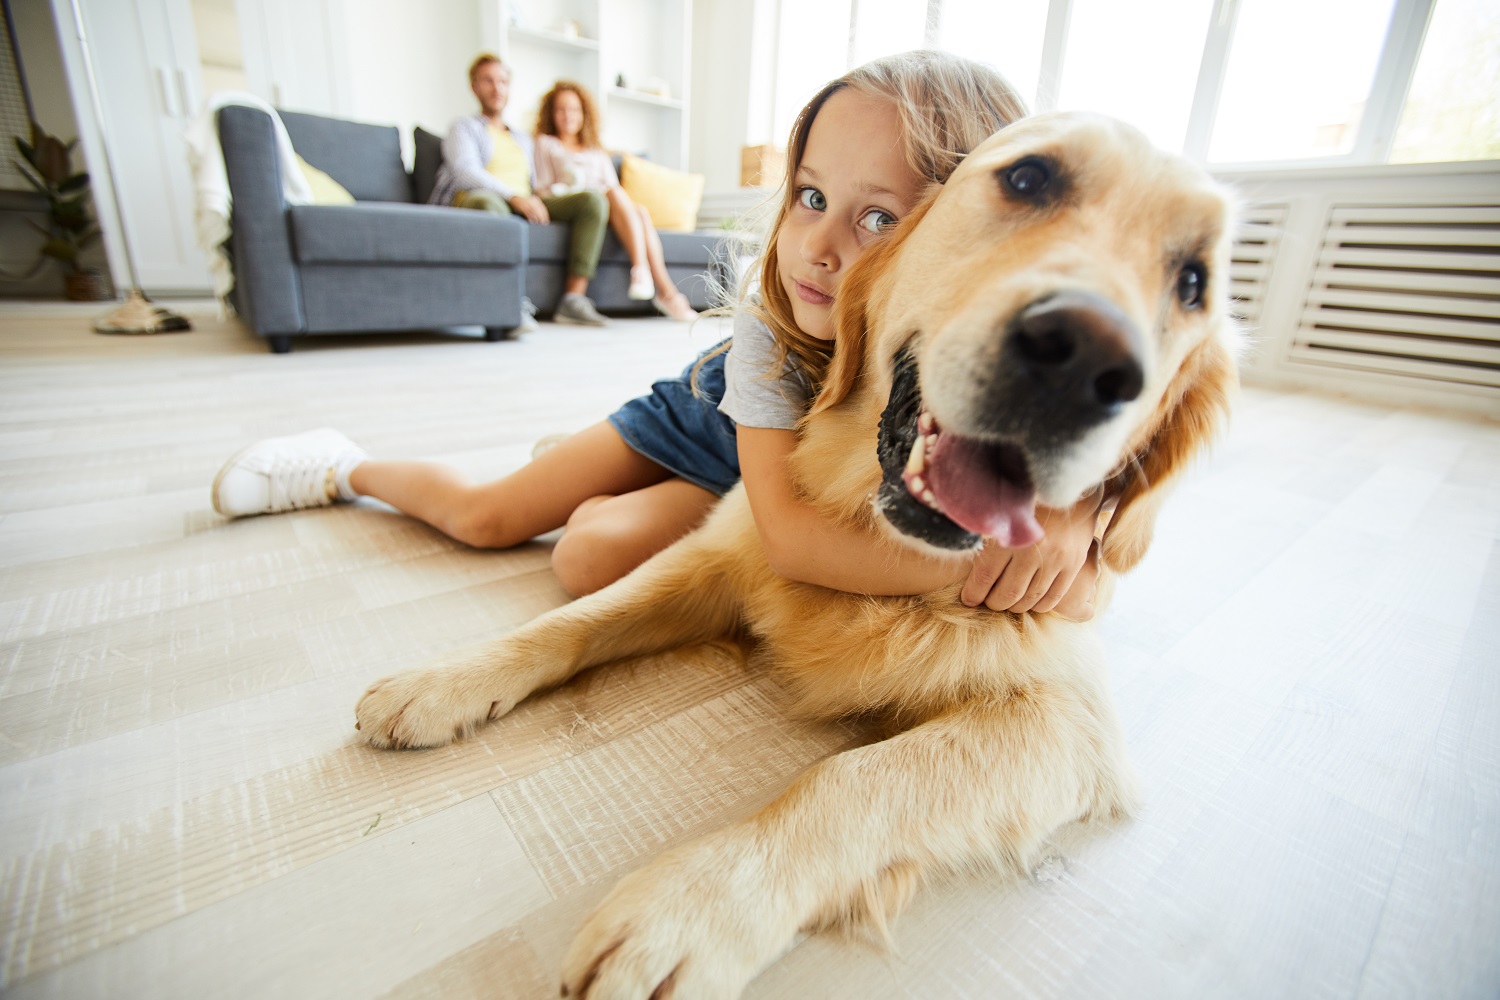 Lighter flooring is more dog and kid friendly